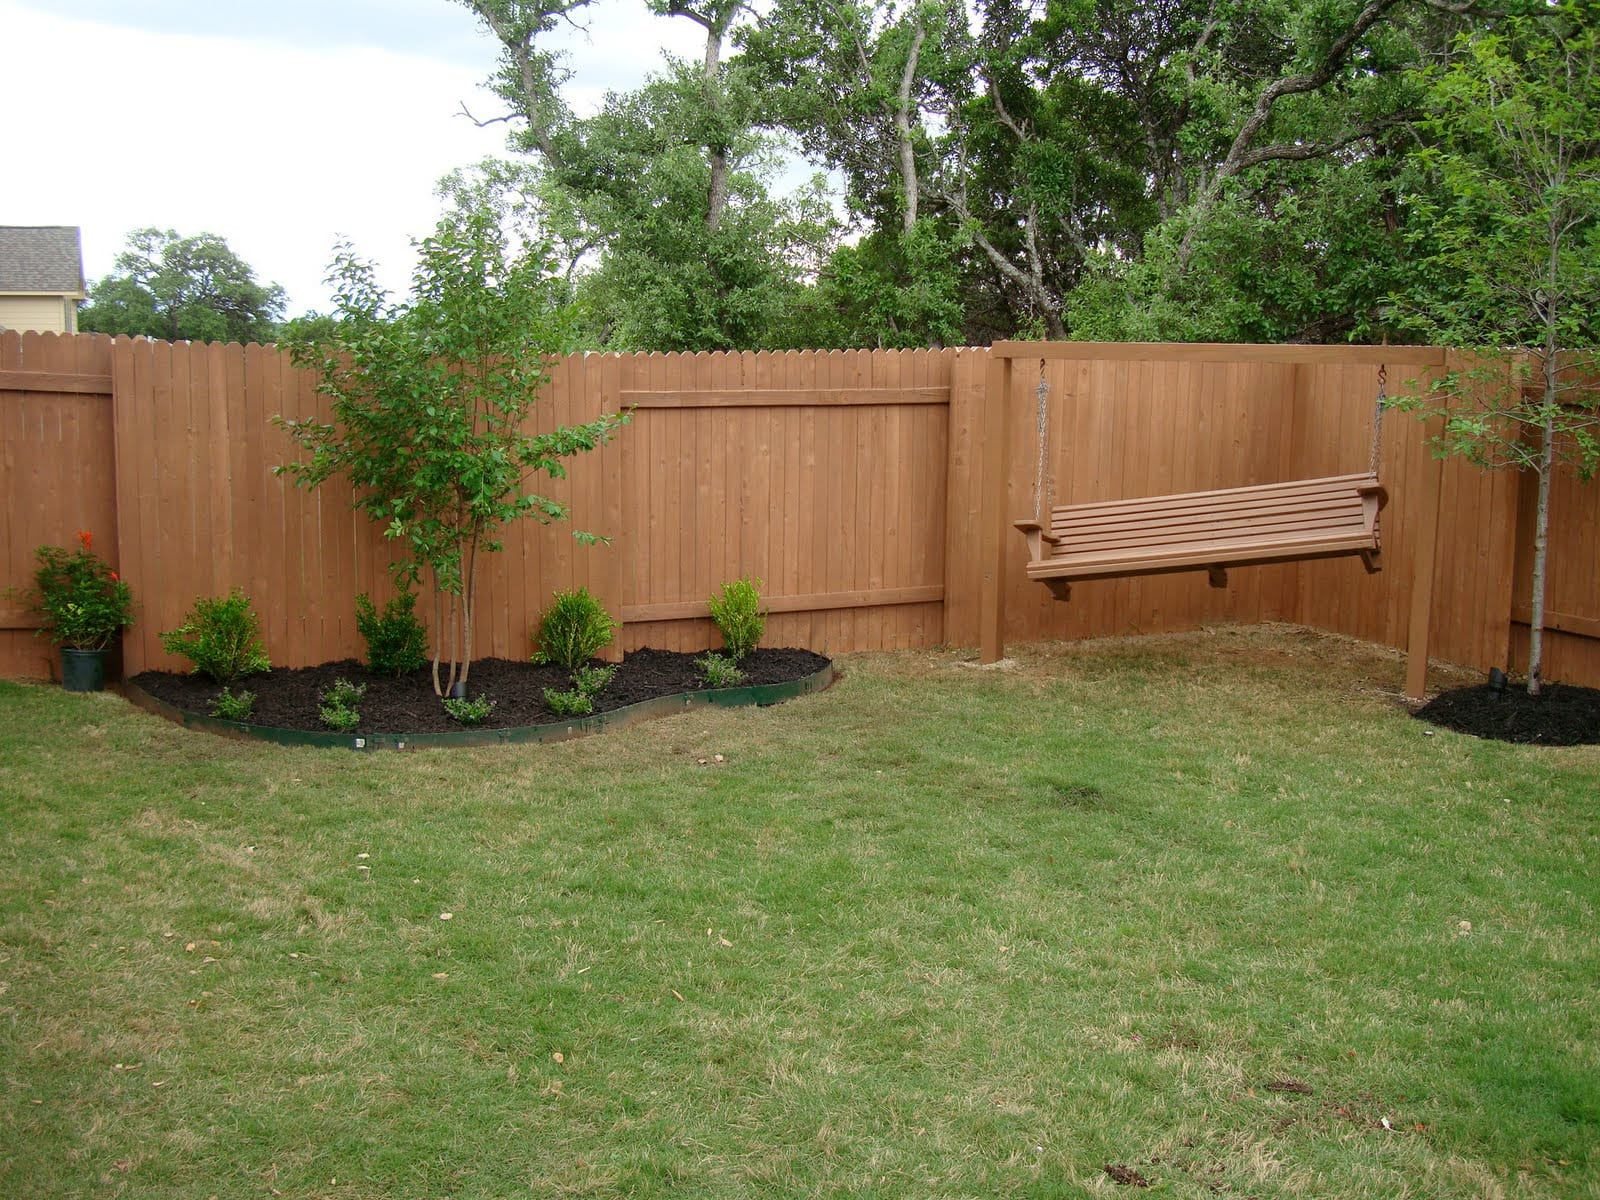 Simphome.com hardwood fence panels wooden for home e2 80 93 design and diy for 2020 2021